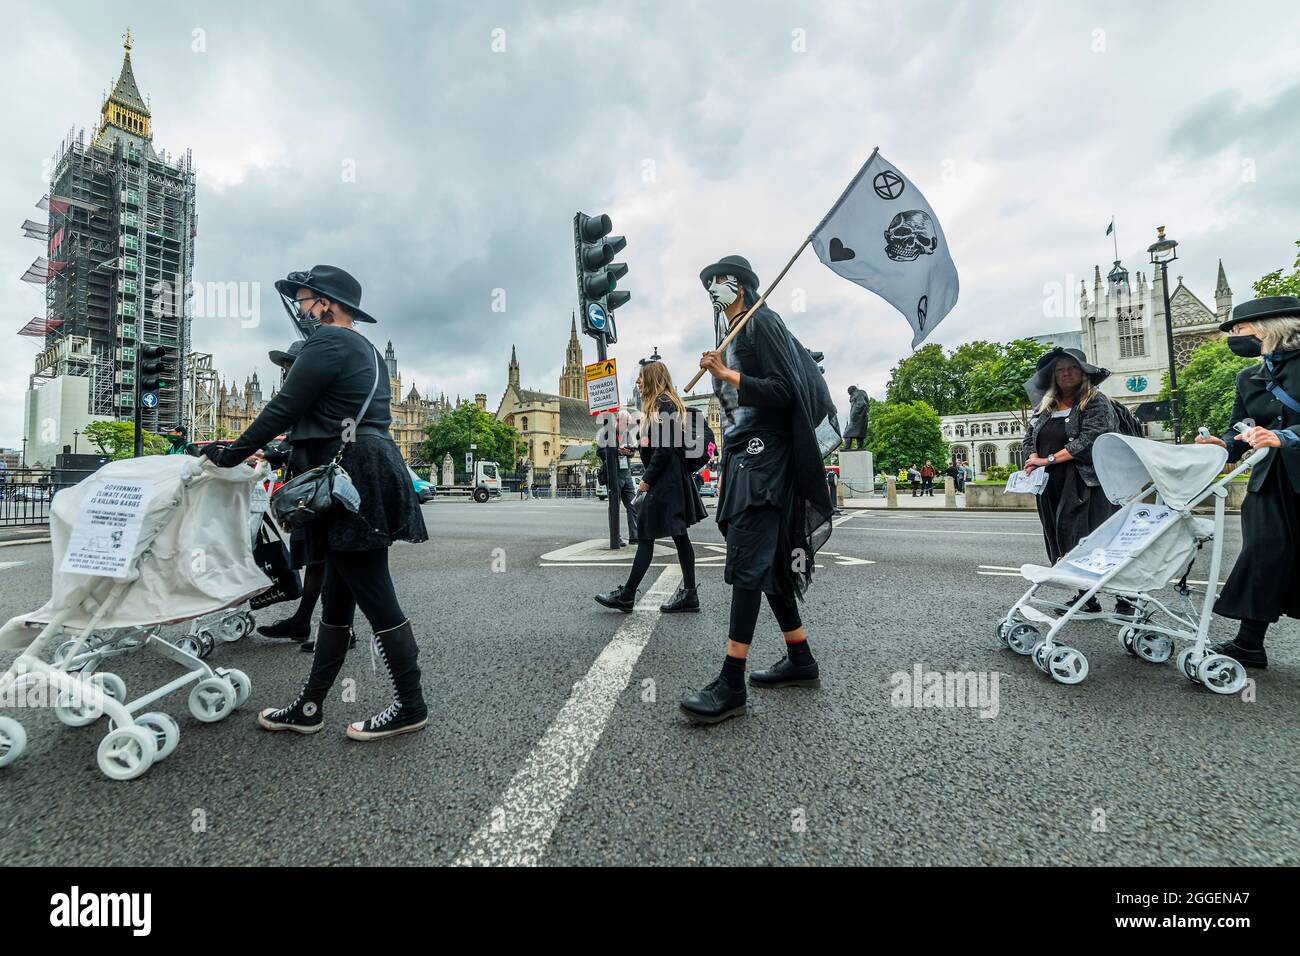 London, UK. 31st Aug, 2021. The white prams were pushed, passed parliament, b rebels in black mourning outfits as they call for an end to the pollution that affects the health of so many chidren around the world. Extinction Rebellion continues its two weeks with a prams protest in Parliament Square and Whitehall, under the overalll Impossible Rebellion name. Credit: Guy Bell/Alamy Live News Stock Photo